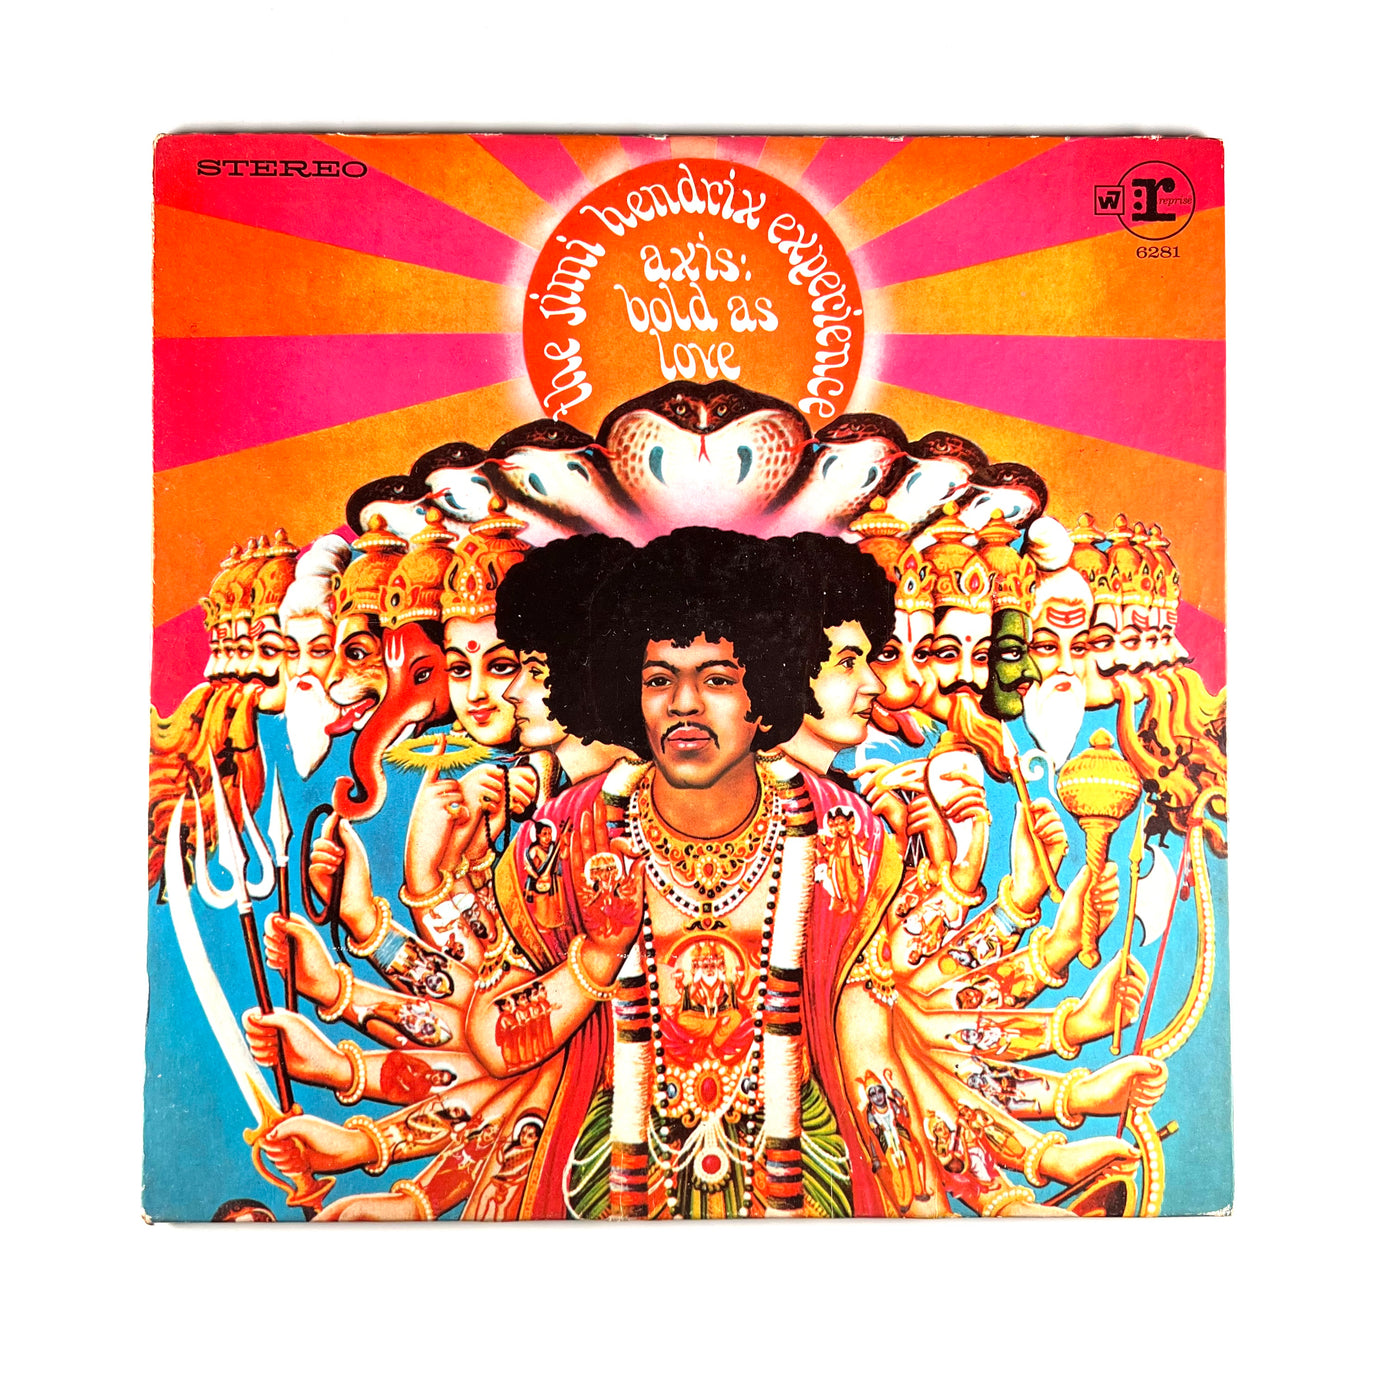 The Jimi Hendrix Experience - Axis: Bold As Love - 1968 First US Press)